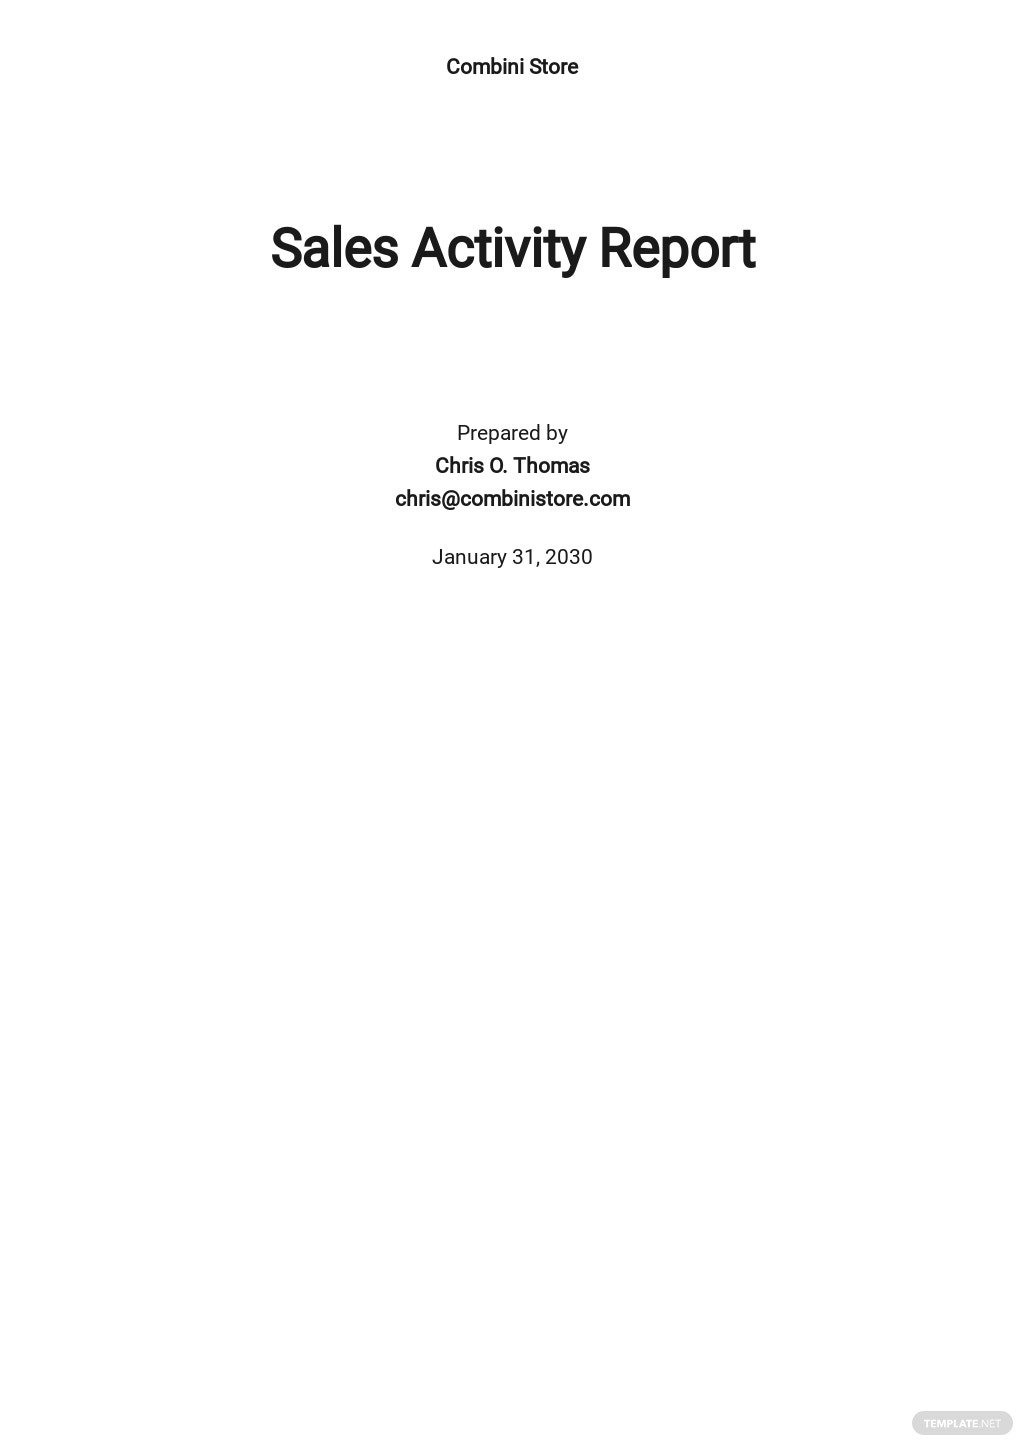 free daily sales activity report template